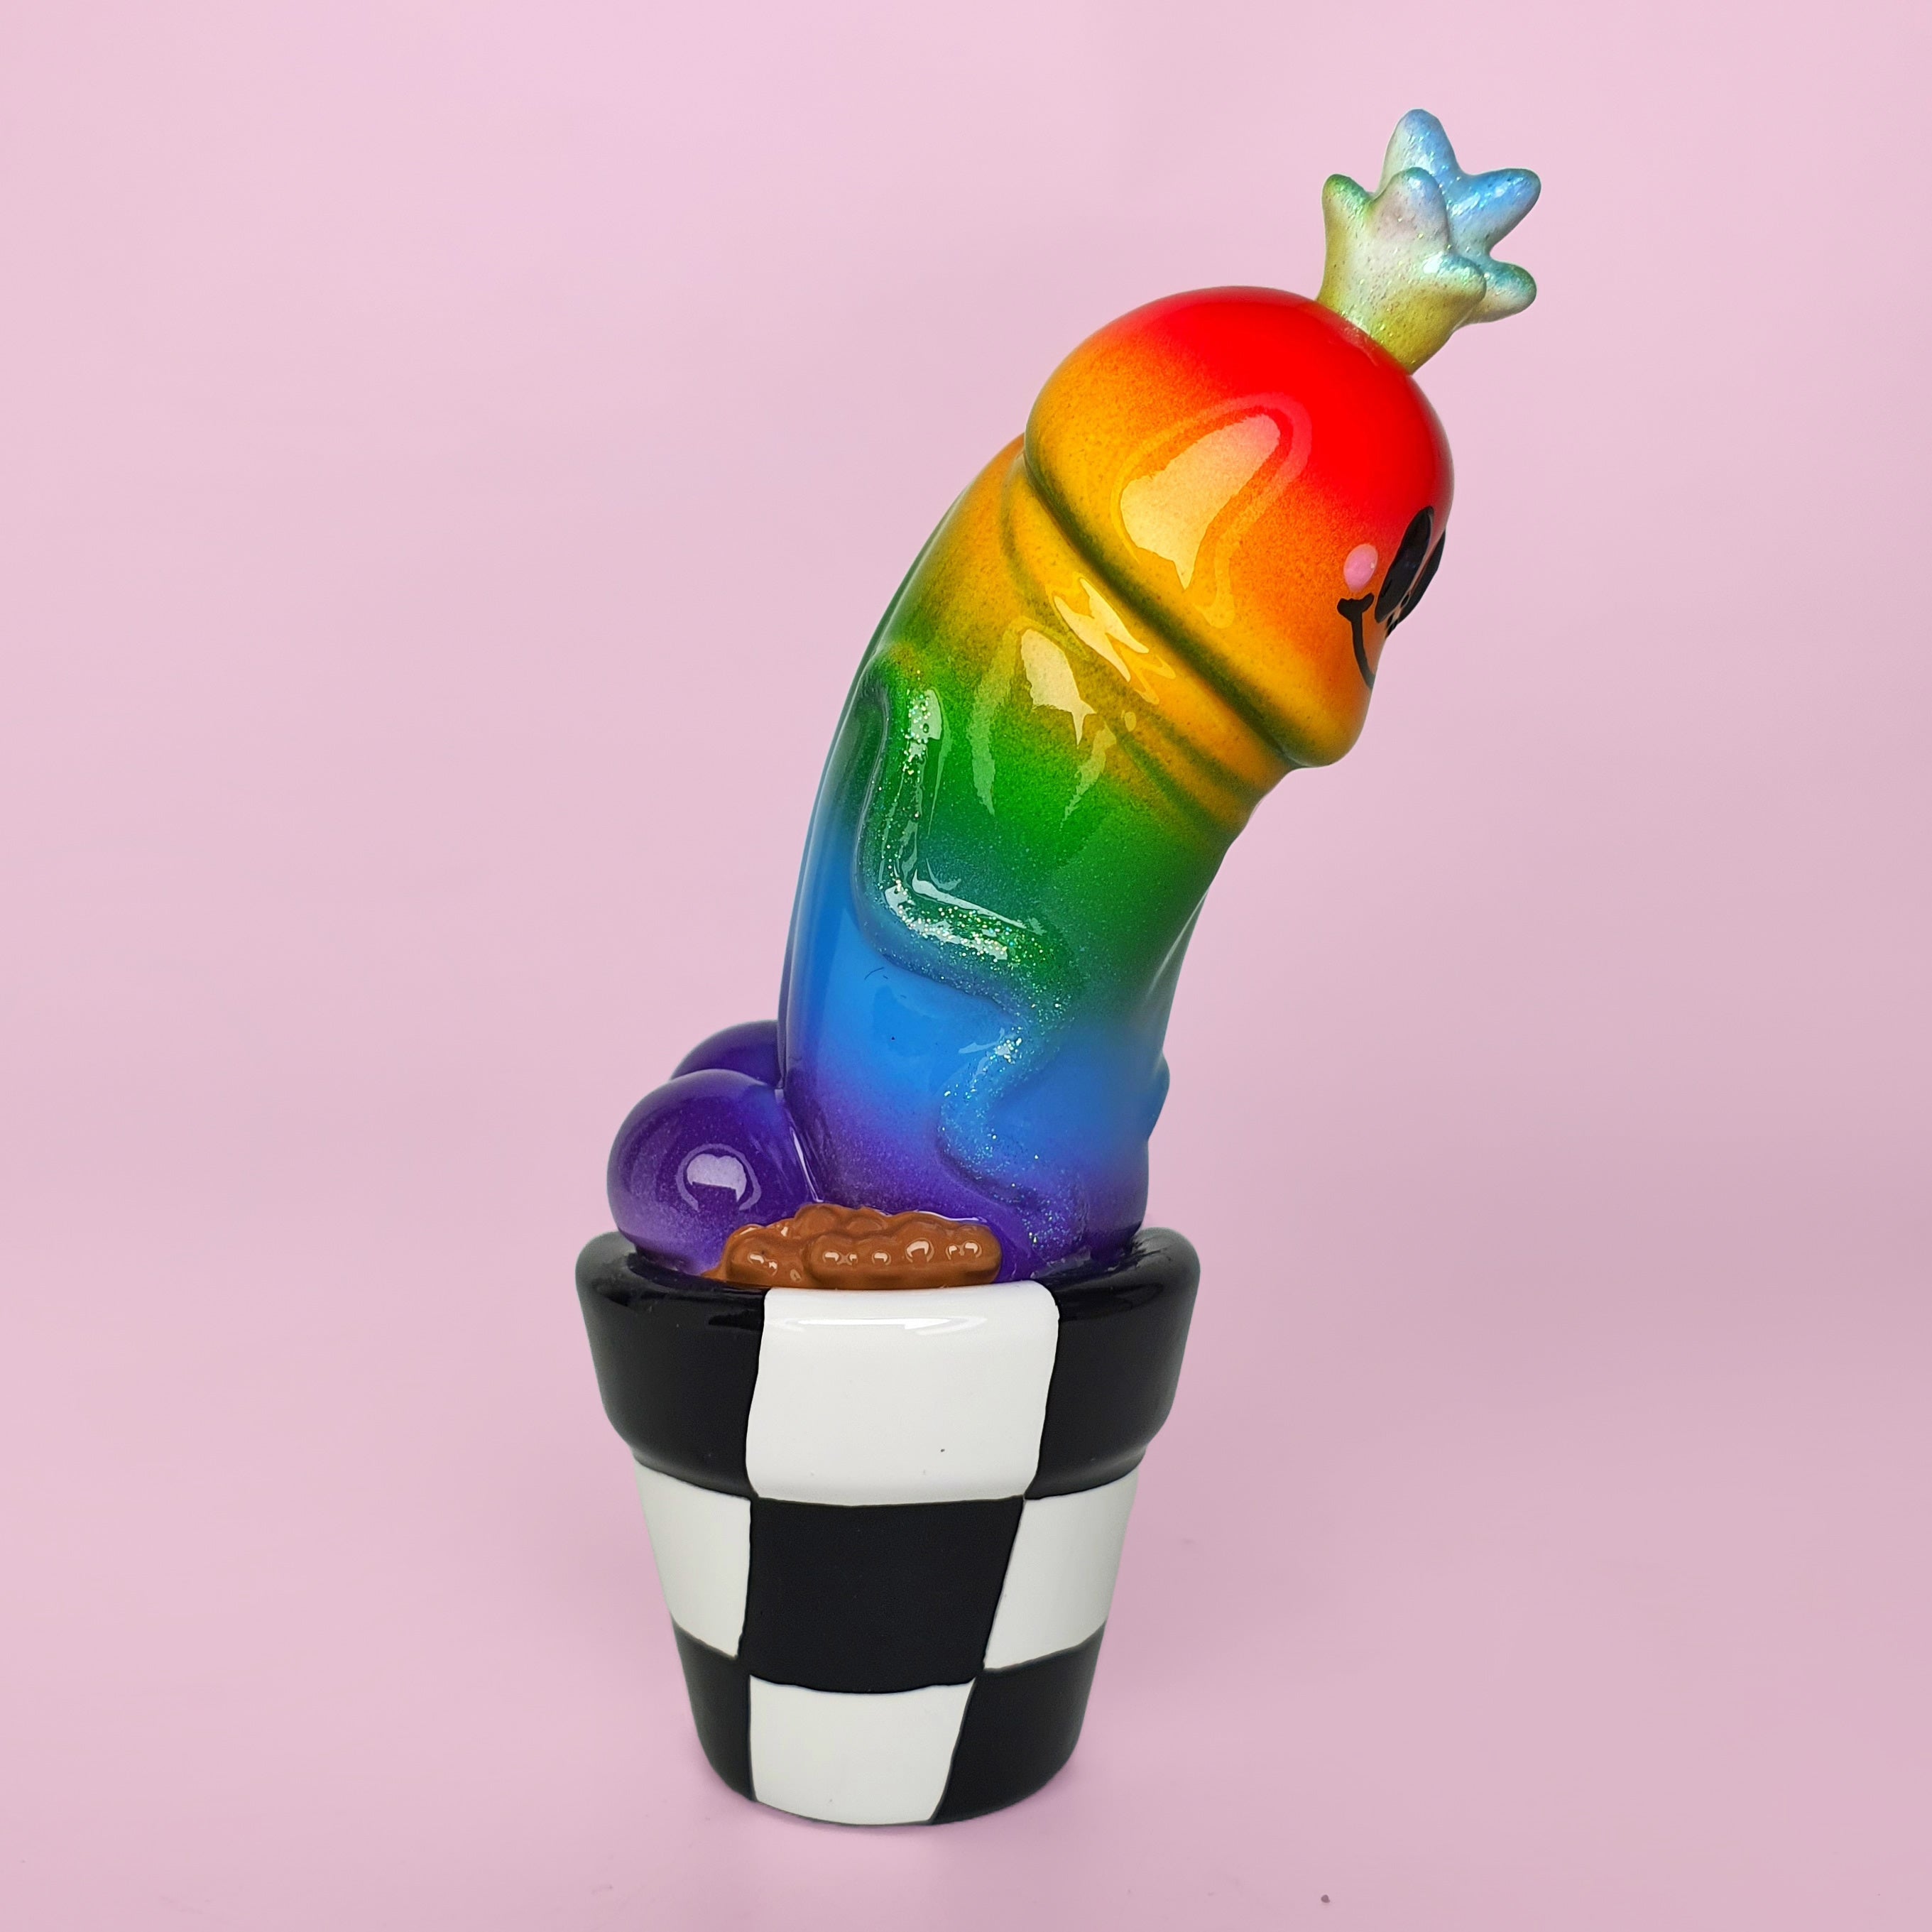 Simon Says Macy & Friends - Rainbow by Kik, a rainbow colored worm in a pot, a purple and black ice cream cup, a rainbow colored toy.